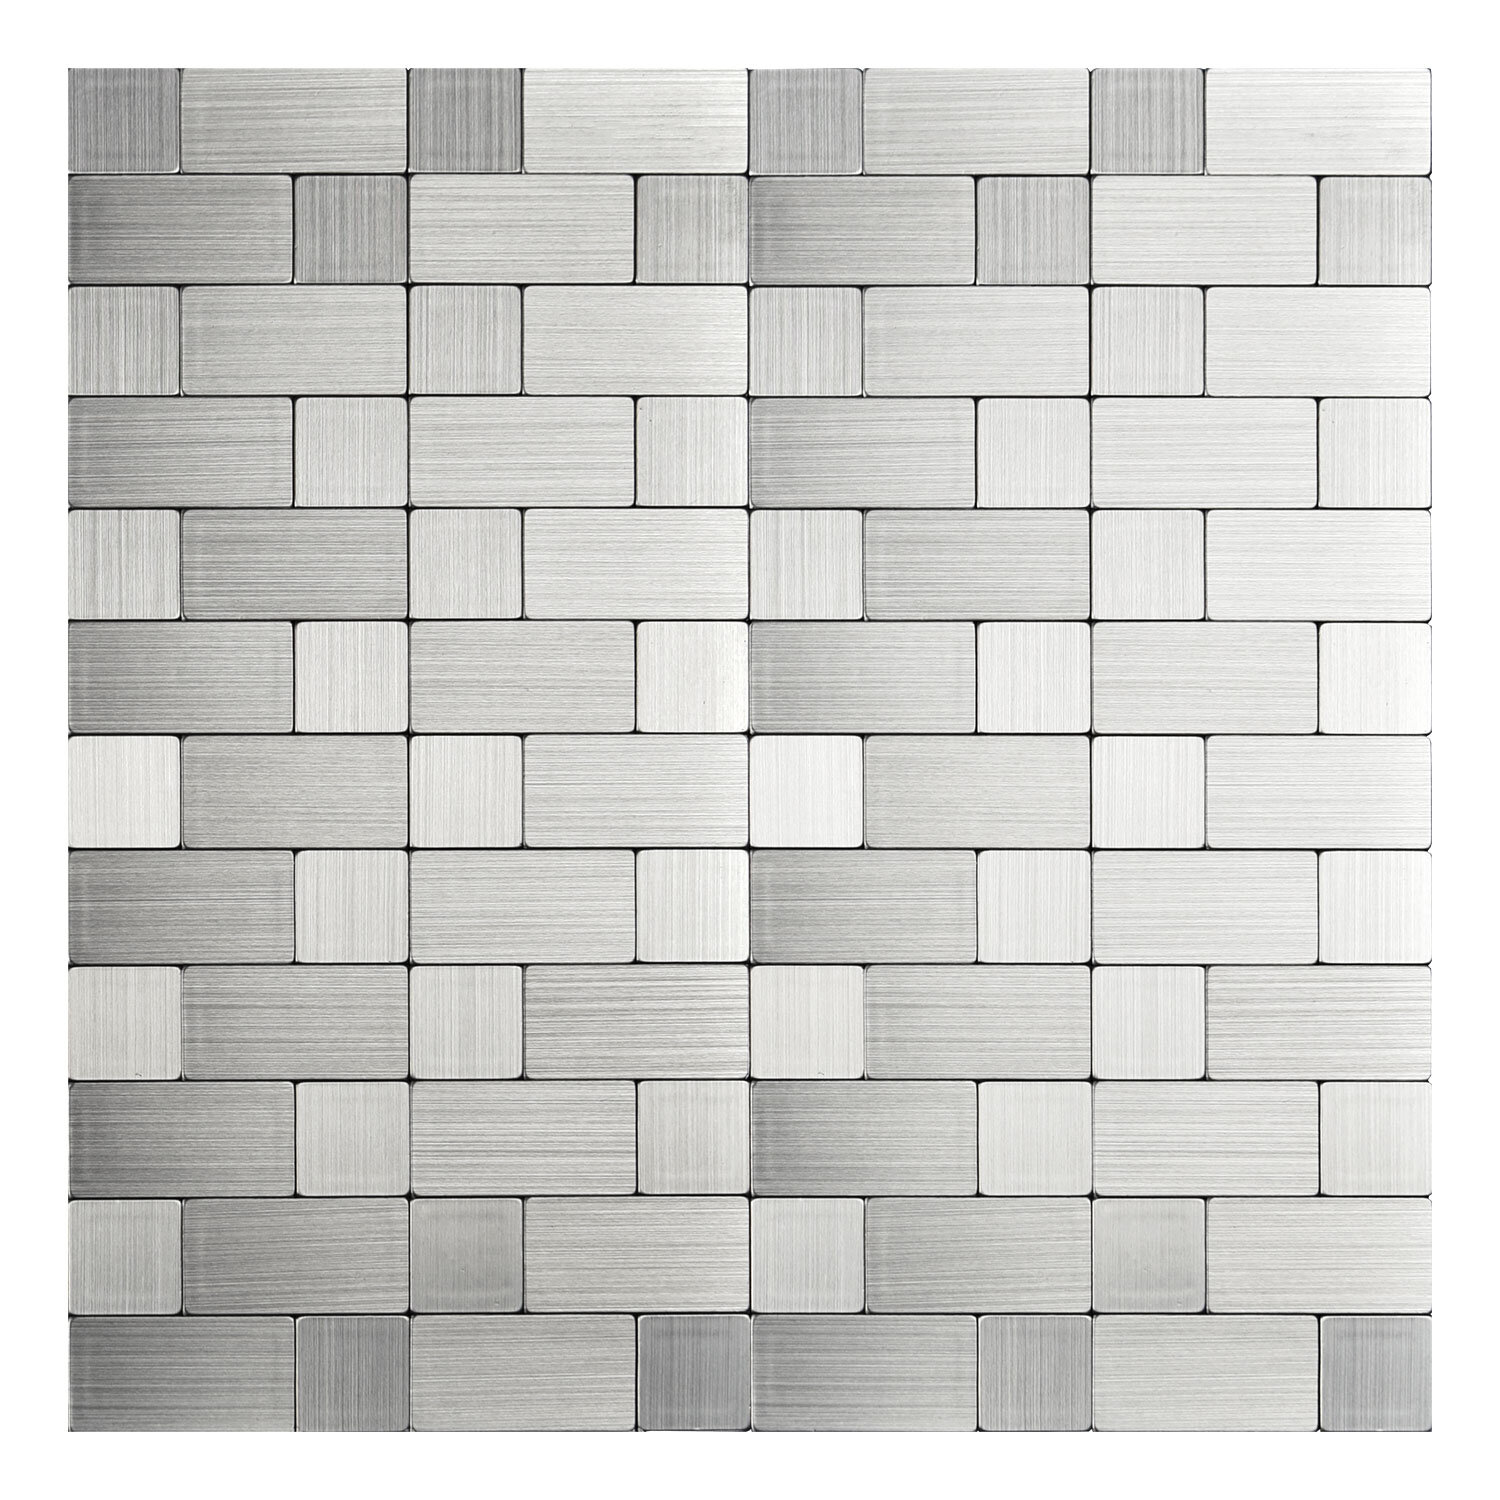 Art3d A16003 - Peel and Stick Metal Mosiac Sheets for Backsplash 12in x 12in 10 Tiles 9.7 sq.ft